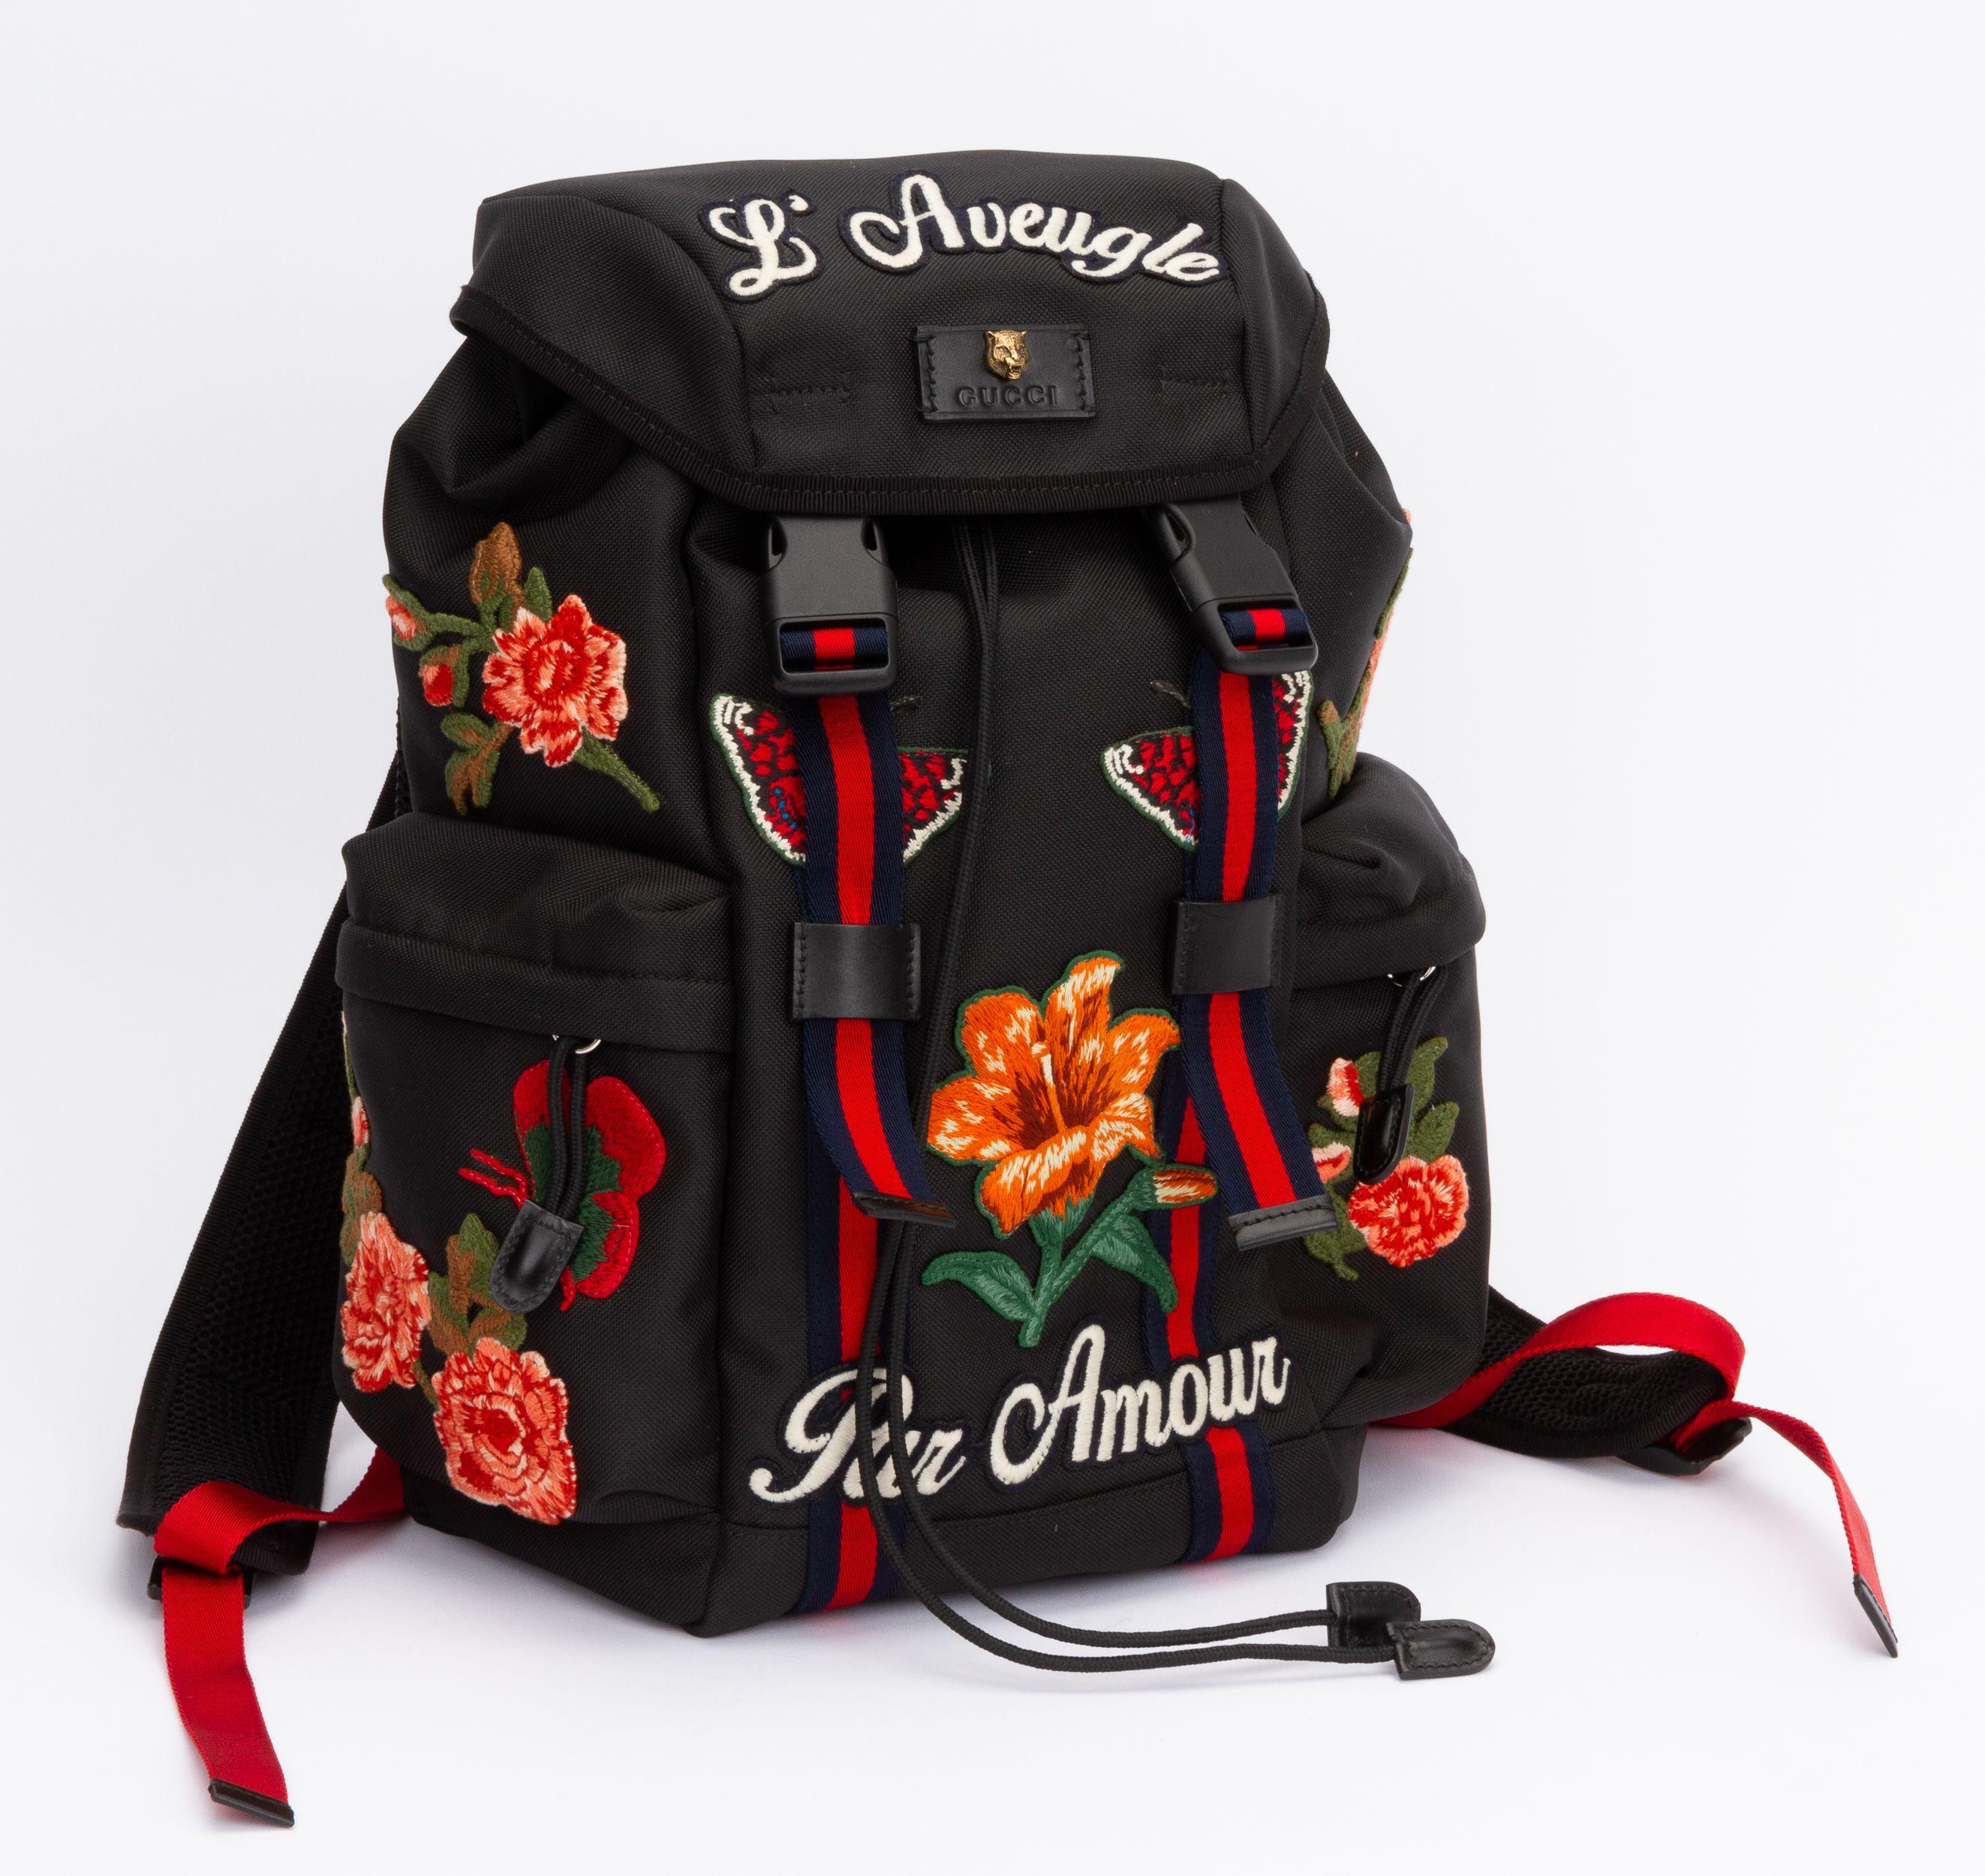 Gucci new black backpack with colorful patches. Includes tag and original dust cover.
